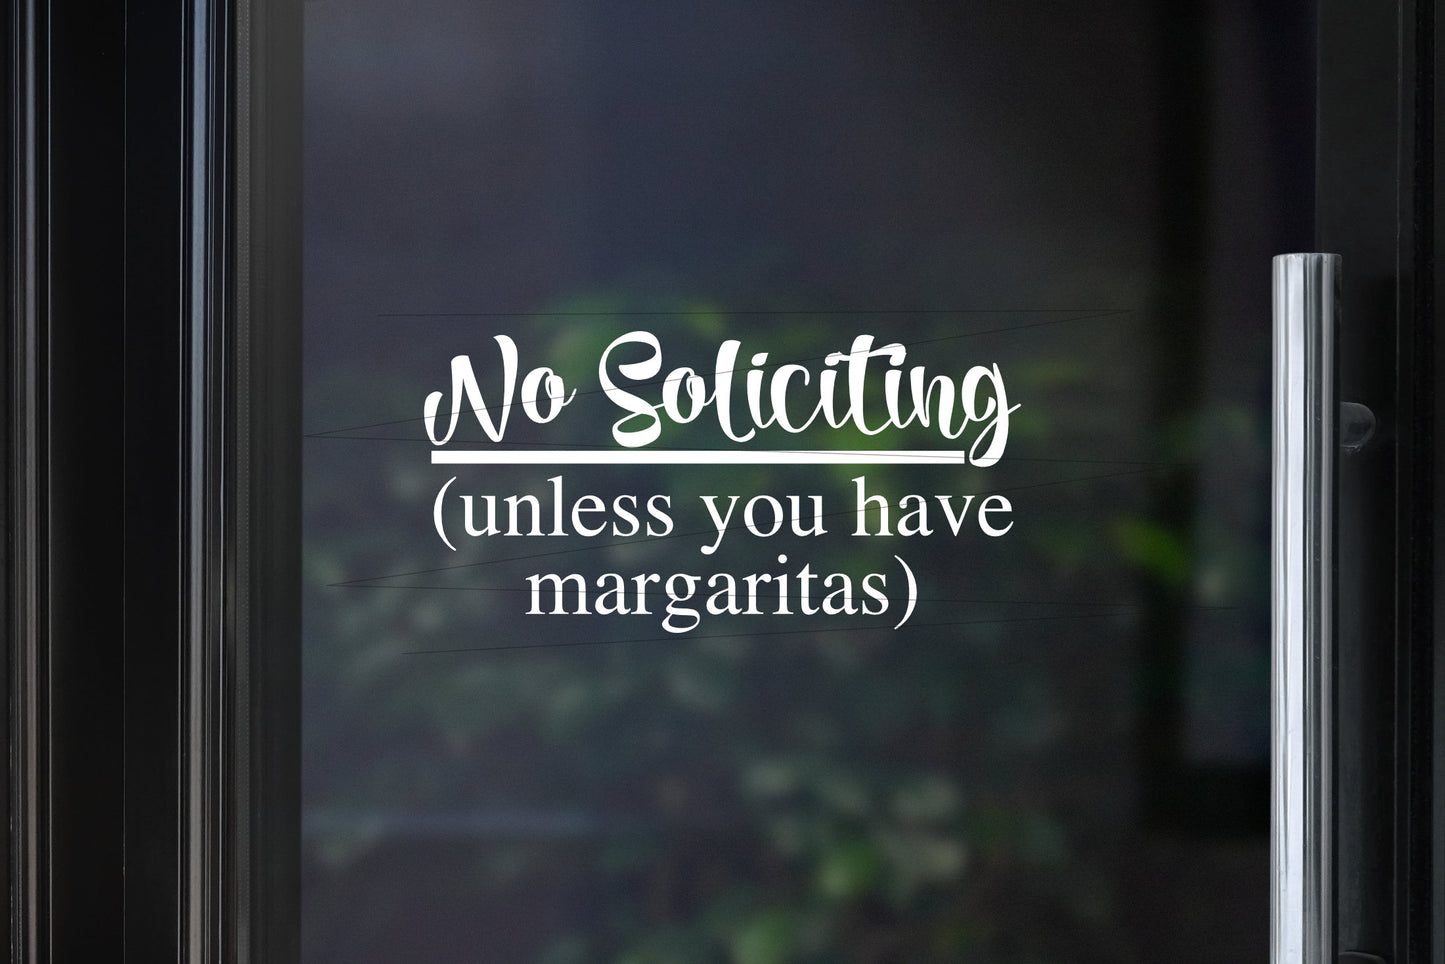 No Soliciting Decal | Kid or Margaritas